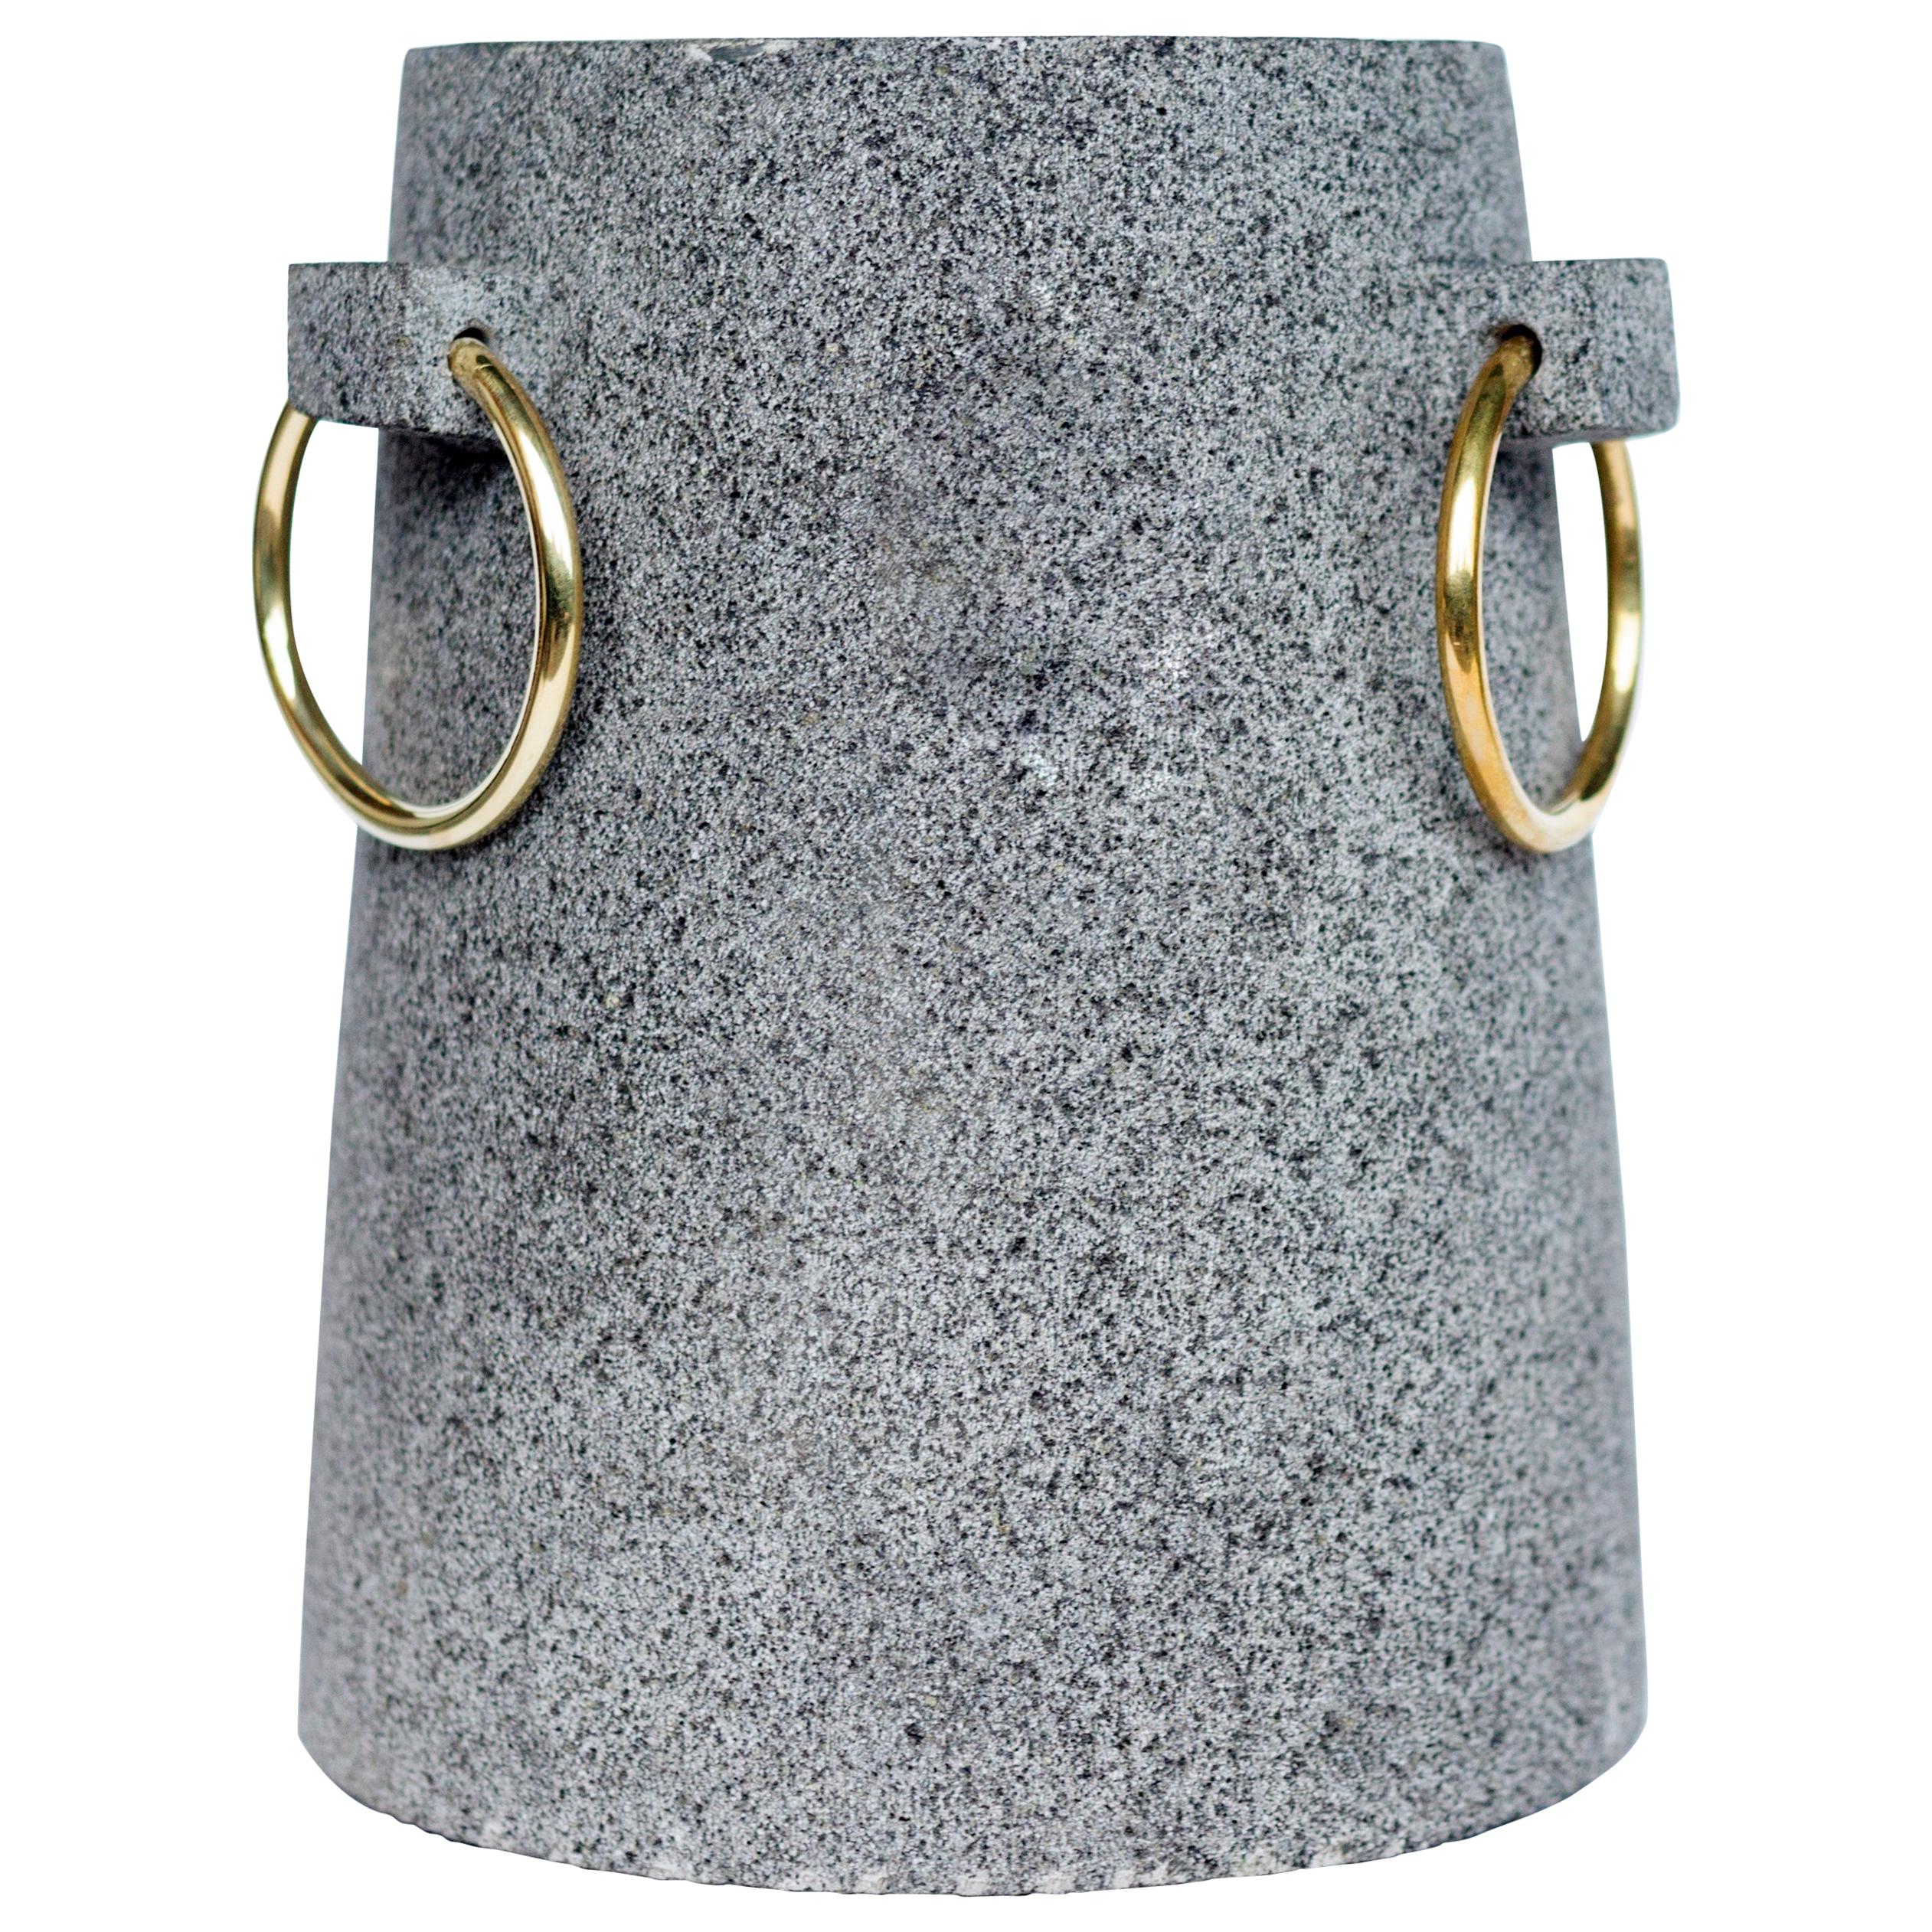 'Mixteca' Vase Handmade in Volcanic Rock and Brass Rings For Sale